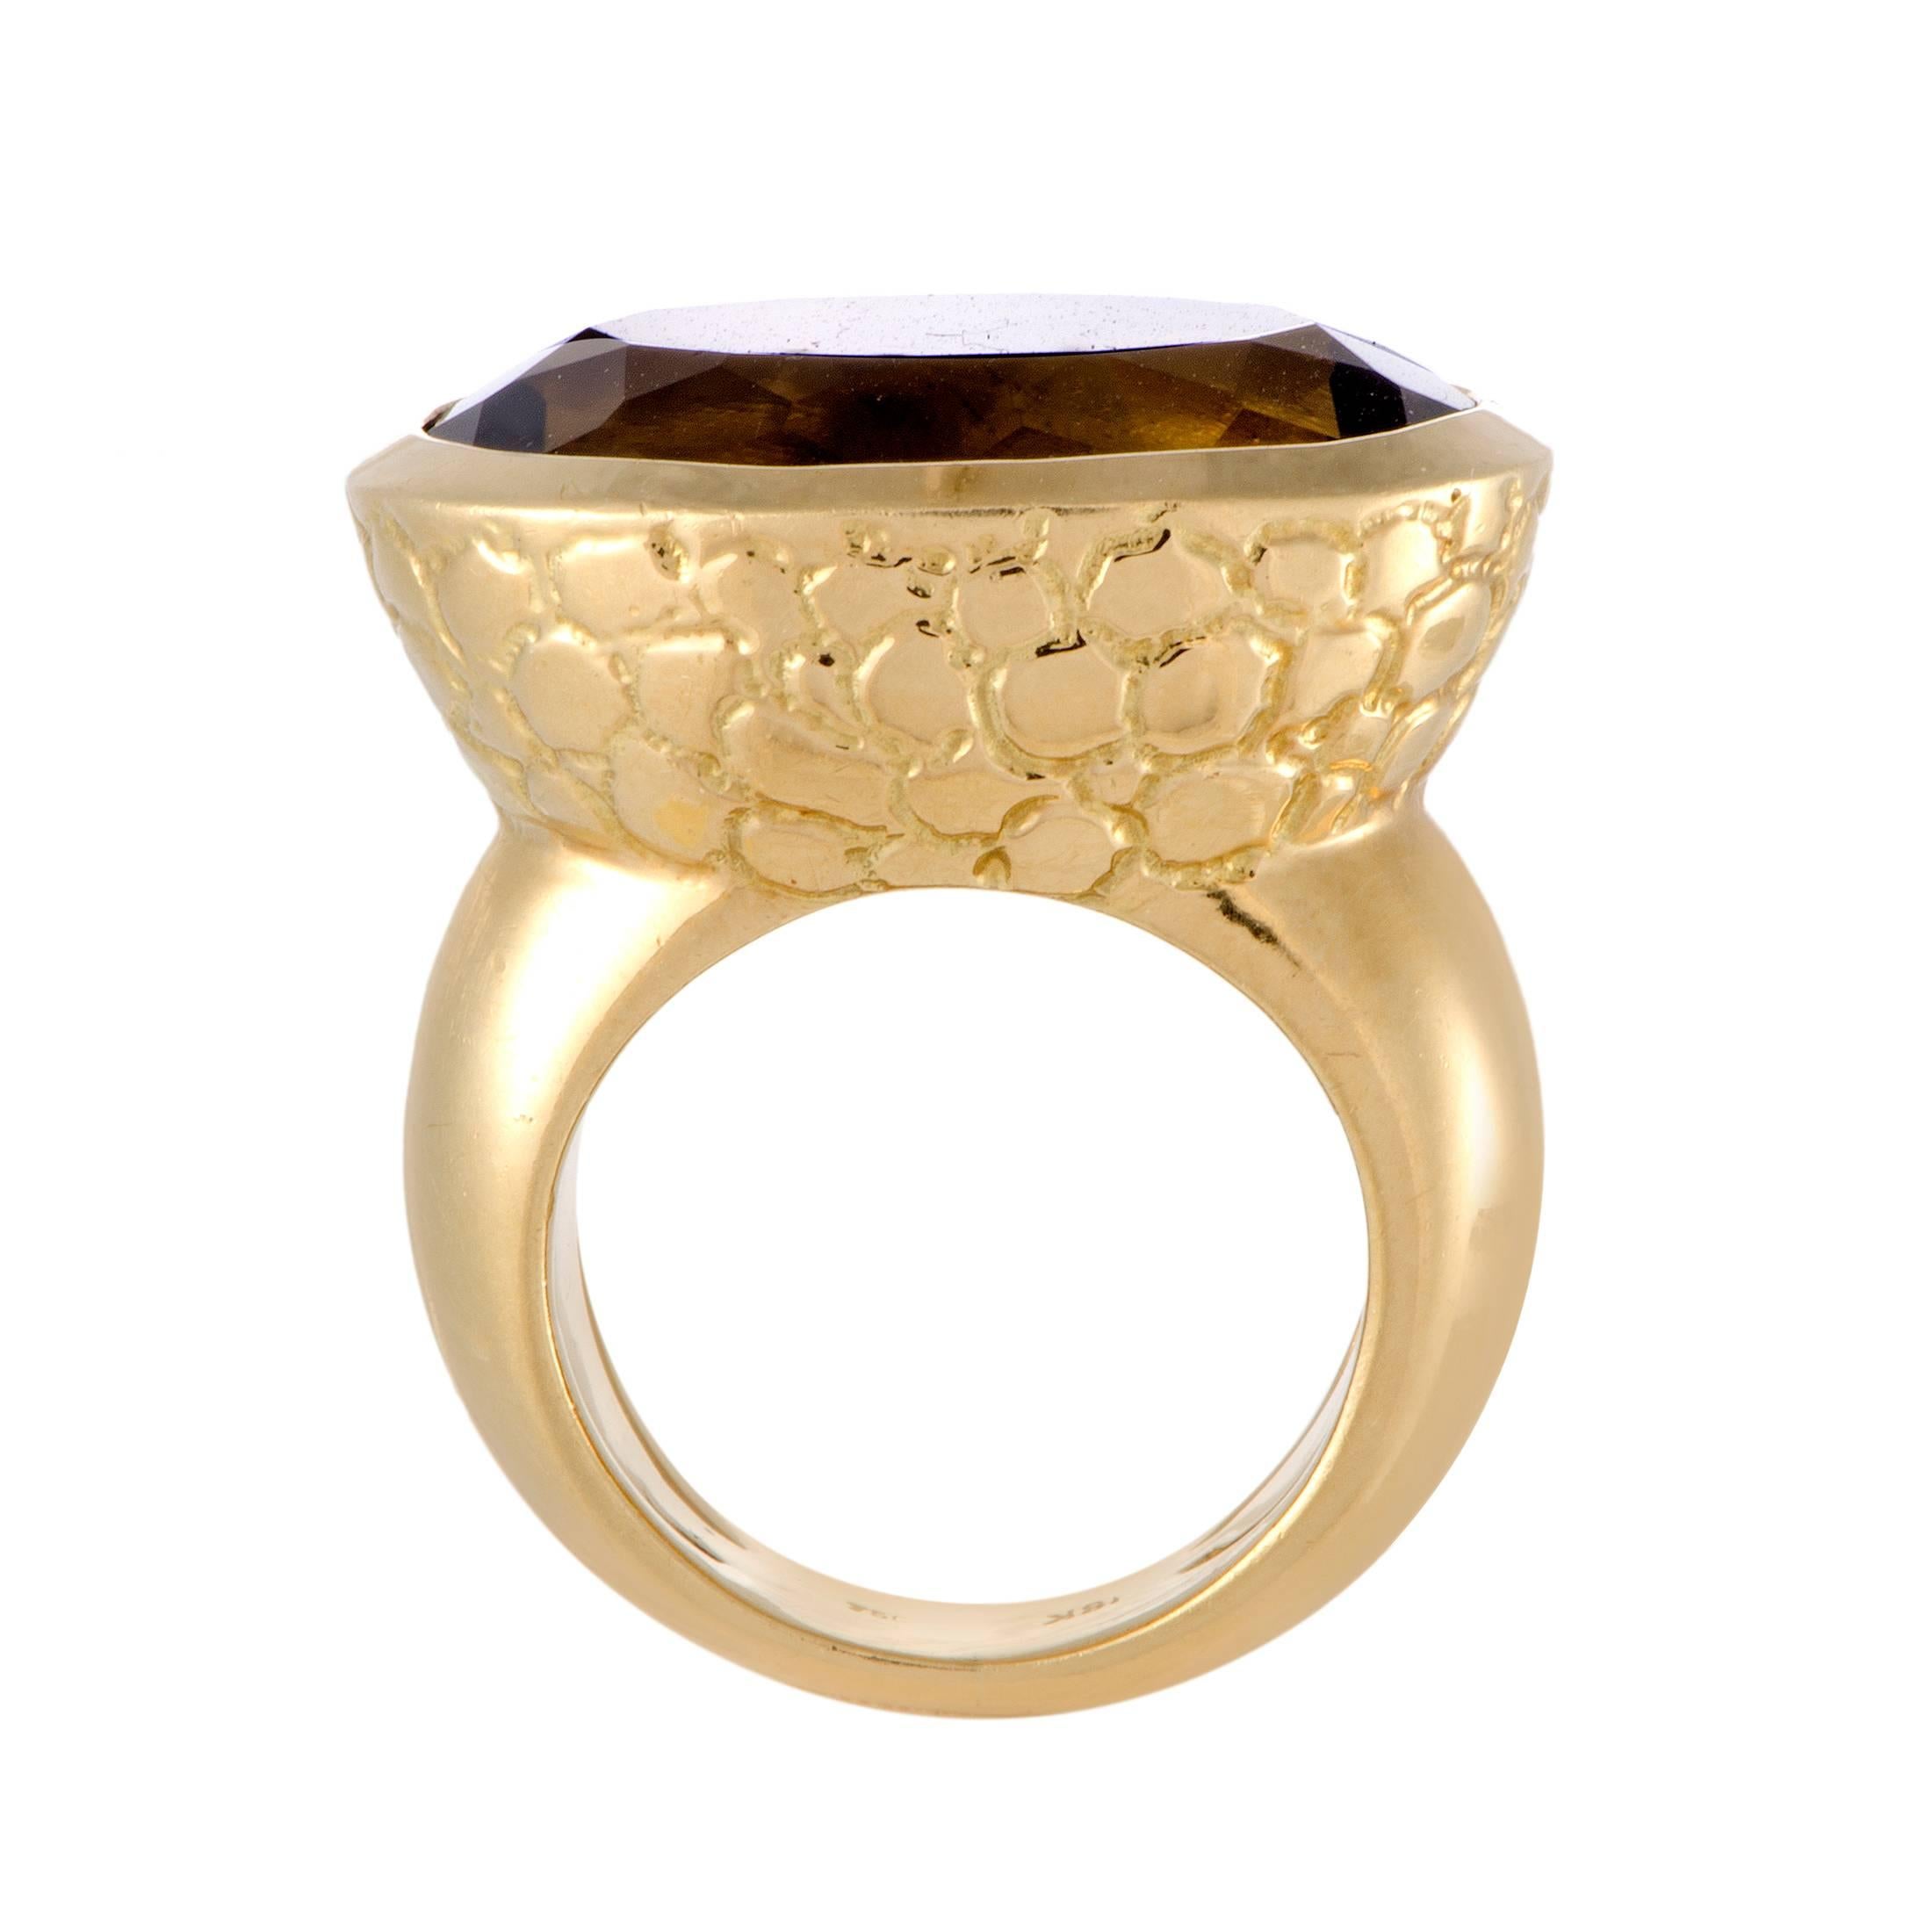 A faceted oval Golden Beryl stone rests atop this ring flaunting a rough, scaly pattern for a timeless elegance. It is crafted by Hellmuth in 18K yellow gold with a 24 carats stone and weighs 26.4grams.
Ring Size: 6
Ring Top Dimensions: 25mm x